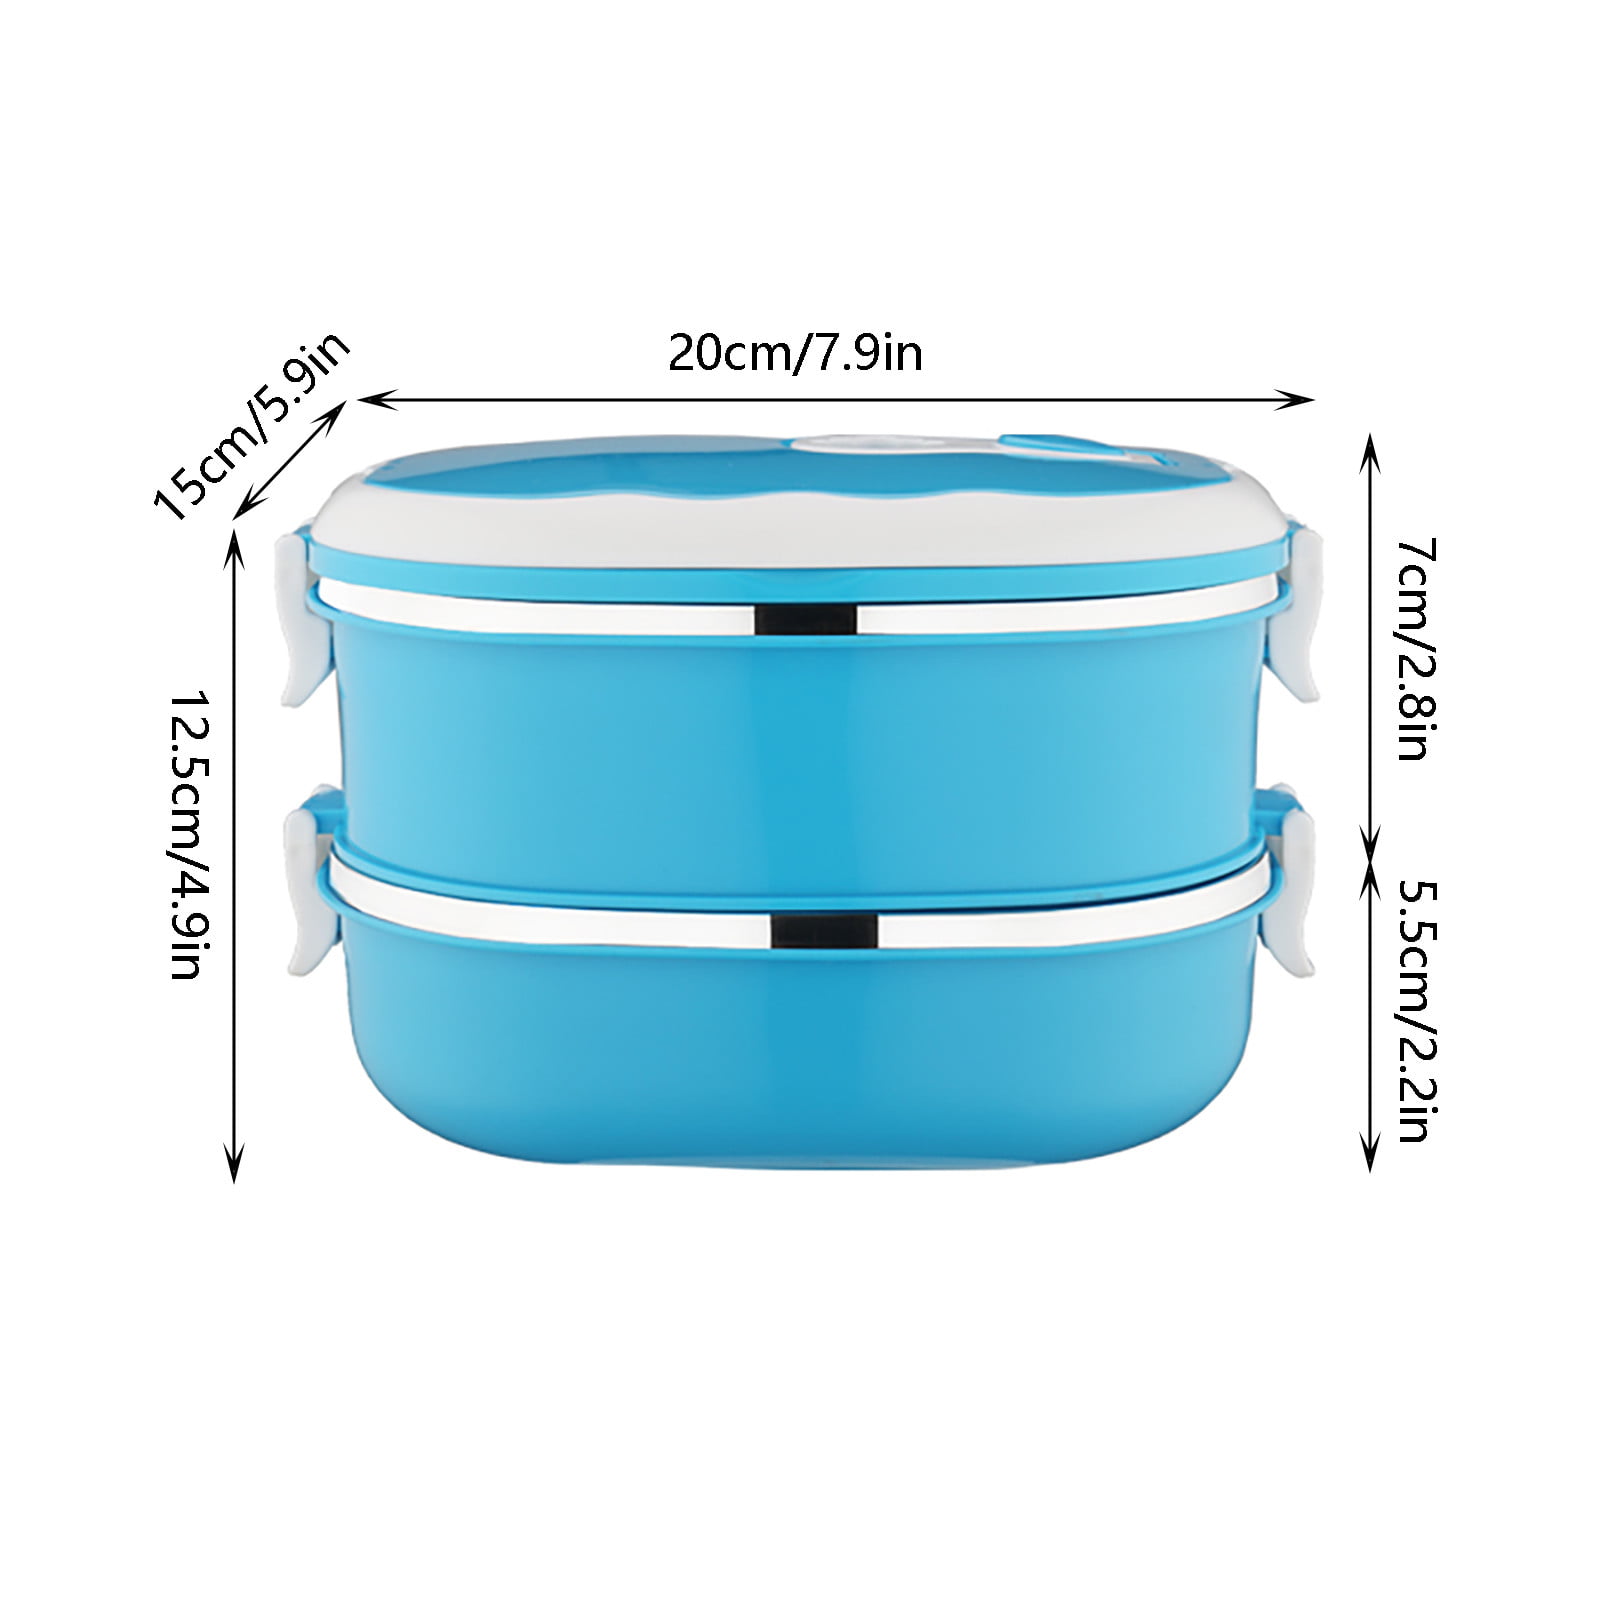 SCGRHP 1/2 Layer Rectangle Thermal for Food Stainless Steel Lunch Container  - Food Storage Container…See more SCGRHP 1/2 Layer Rectangle Thermal for